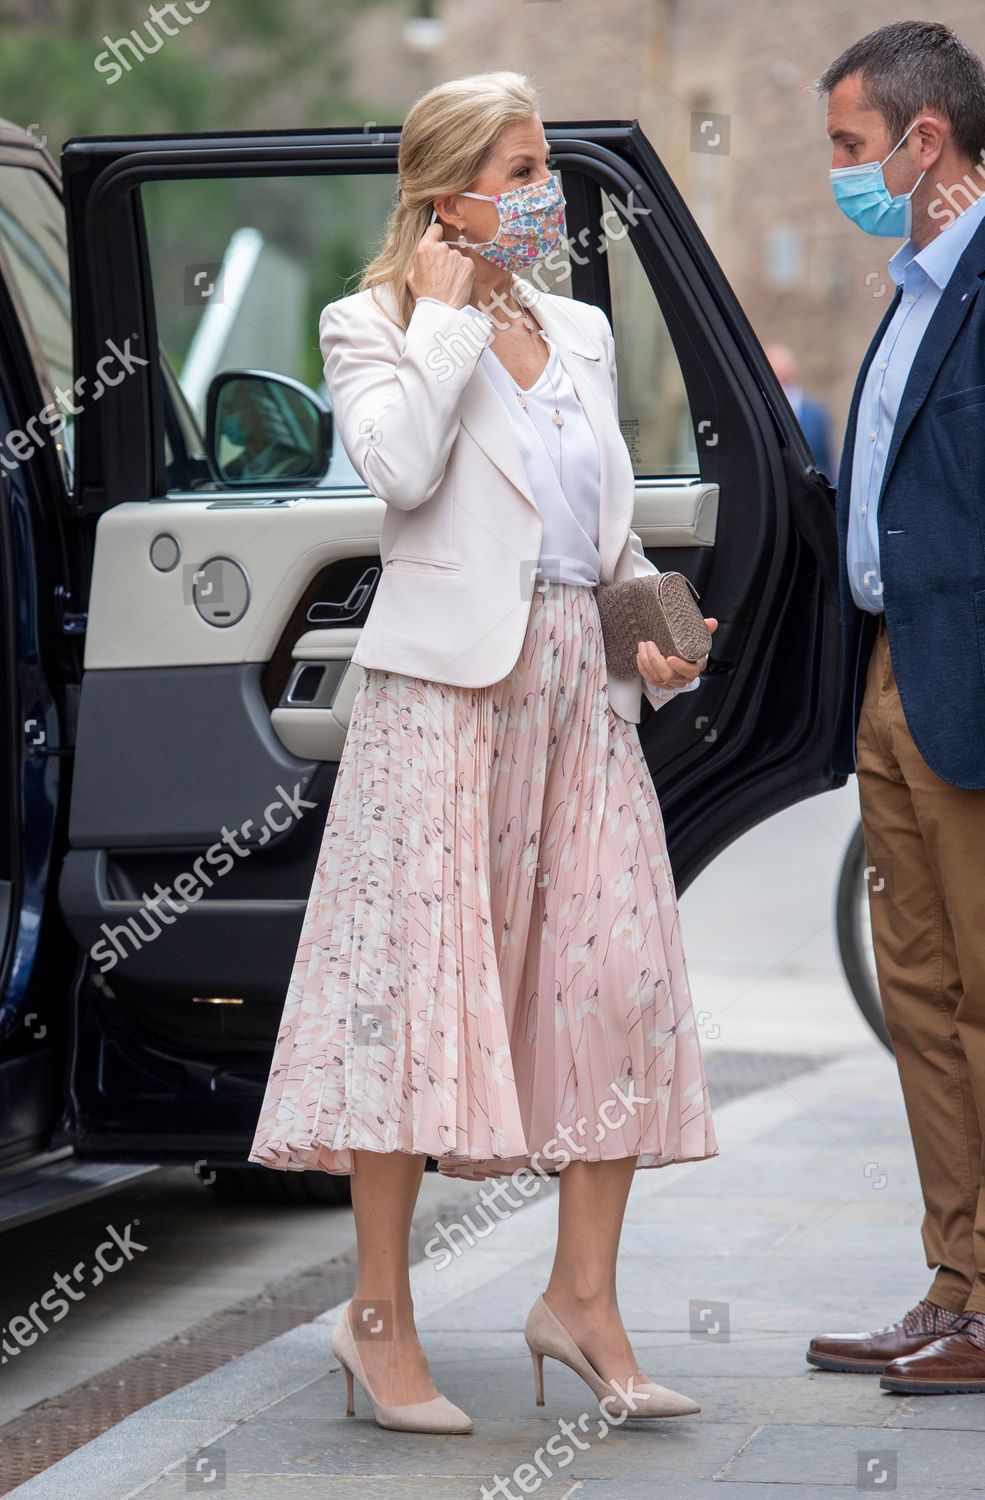 CASA REAL BRITÁNICA - Página 77 Prince-edward-and-sophie-countess-of-wessex-visit-to-edinburgh-scotland-uk-shutterstock-editorial-12173651ay